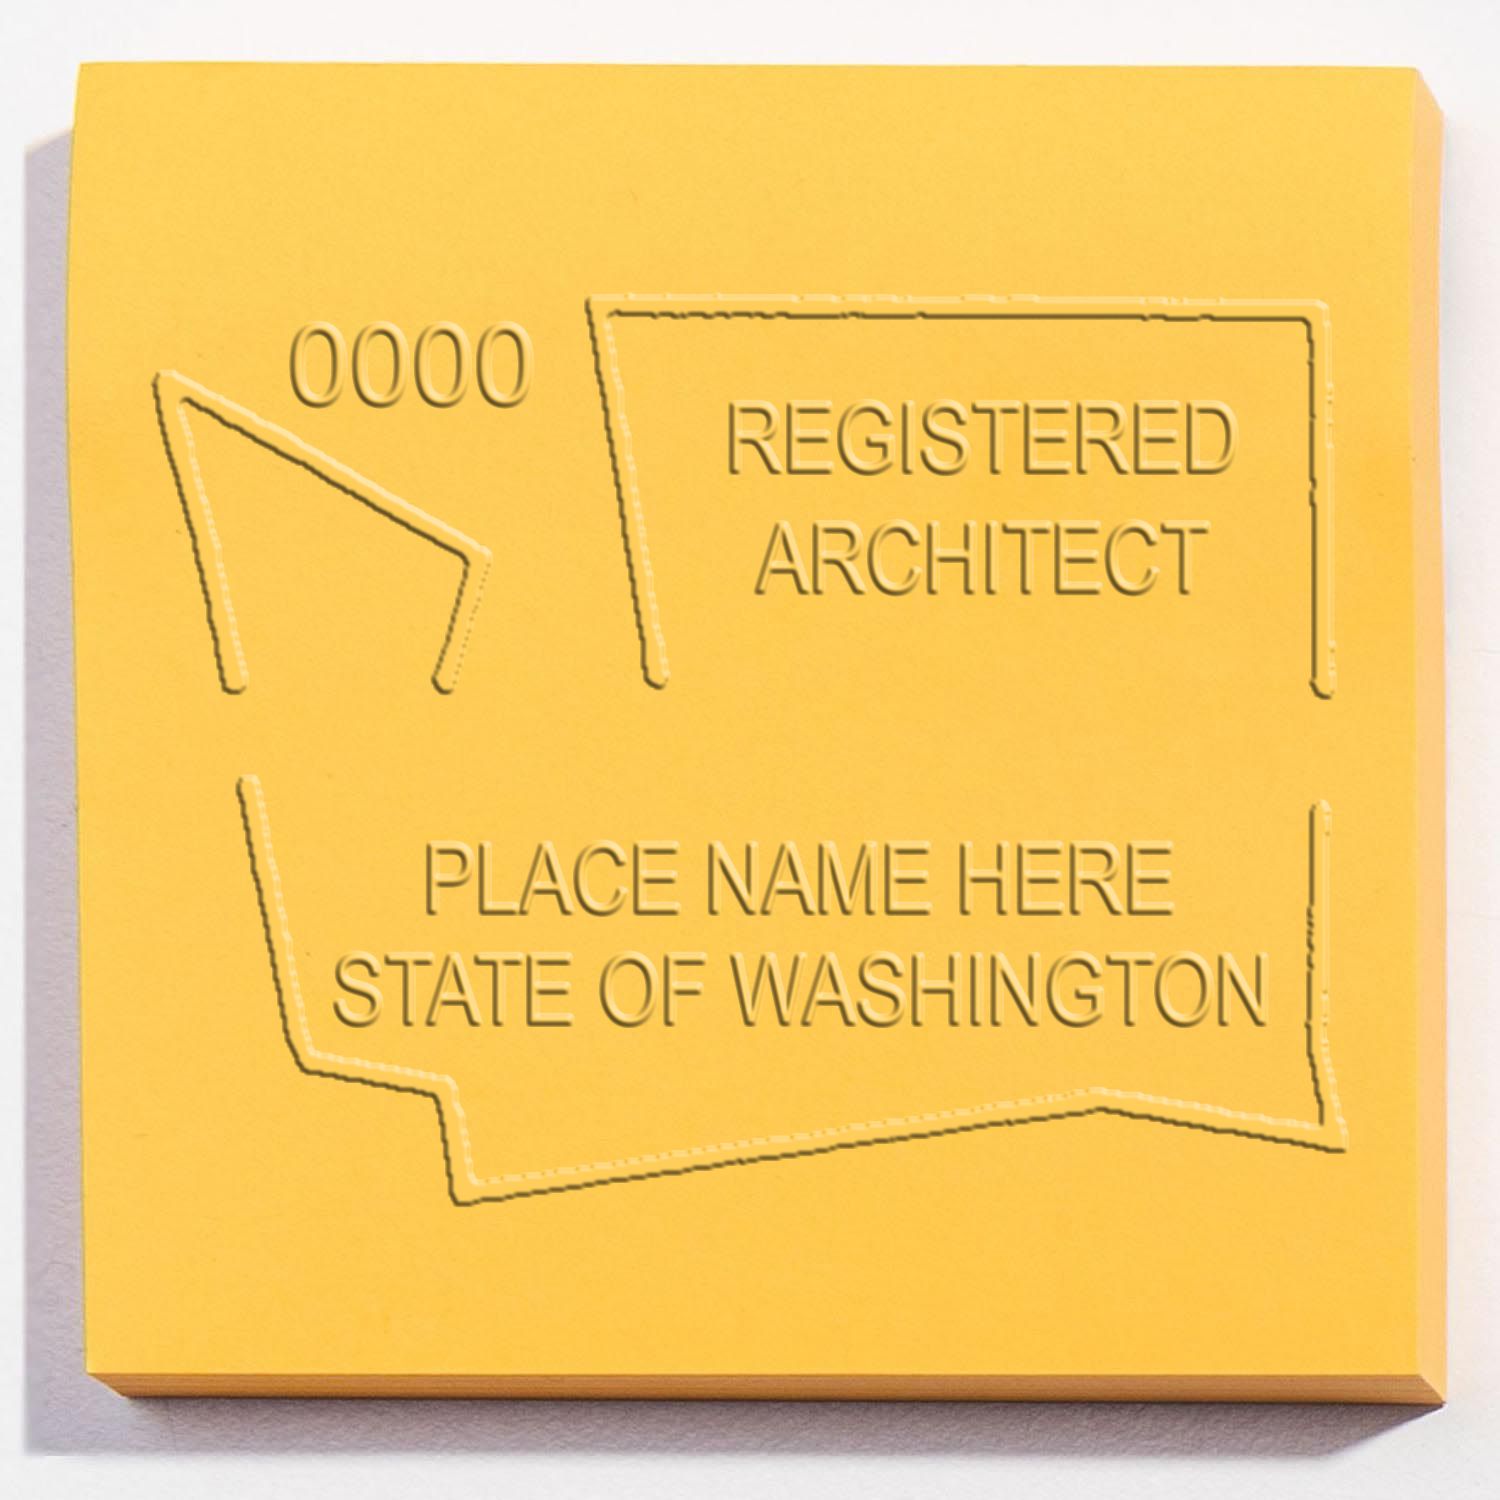 A stamped imprint of the Gift Washington Architect Seal in this stylish lifestyle photo, setting the tone for a unique and personalized product.